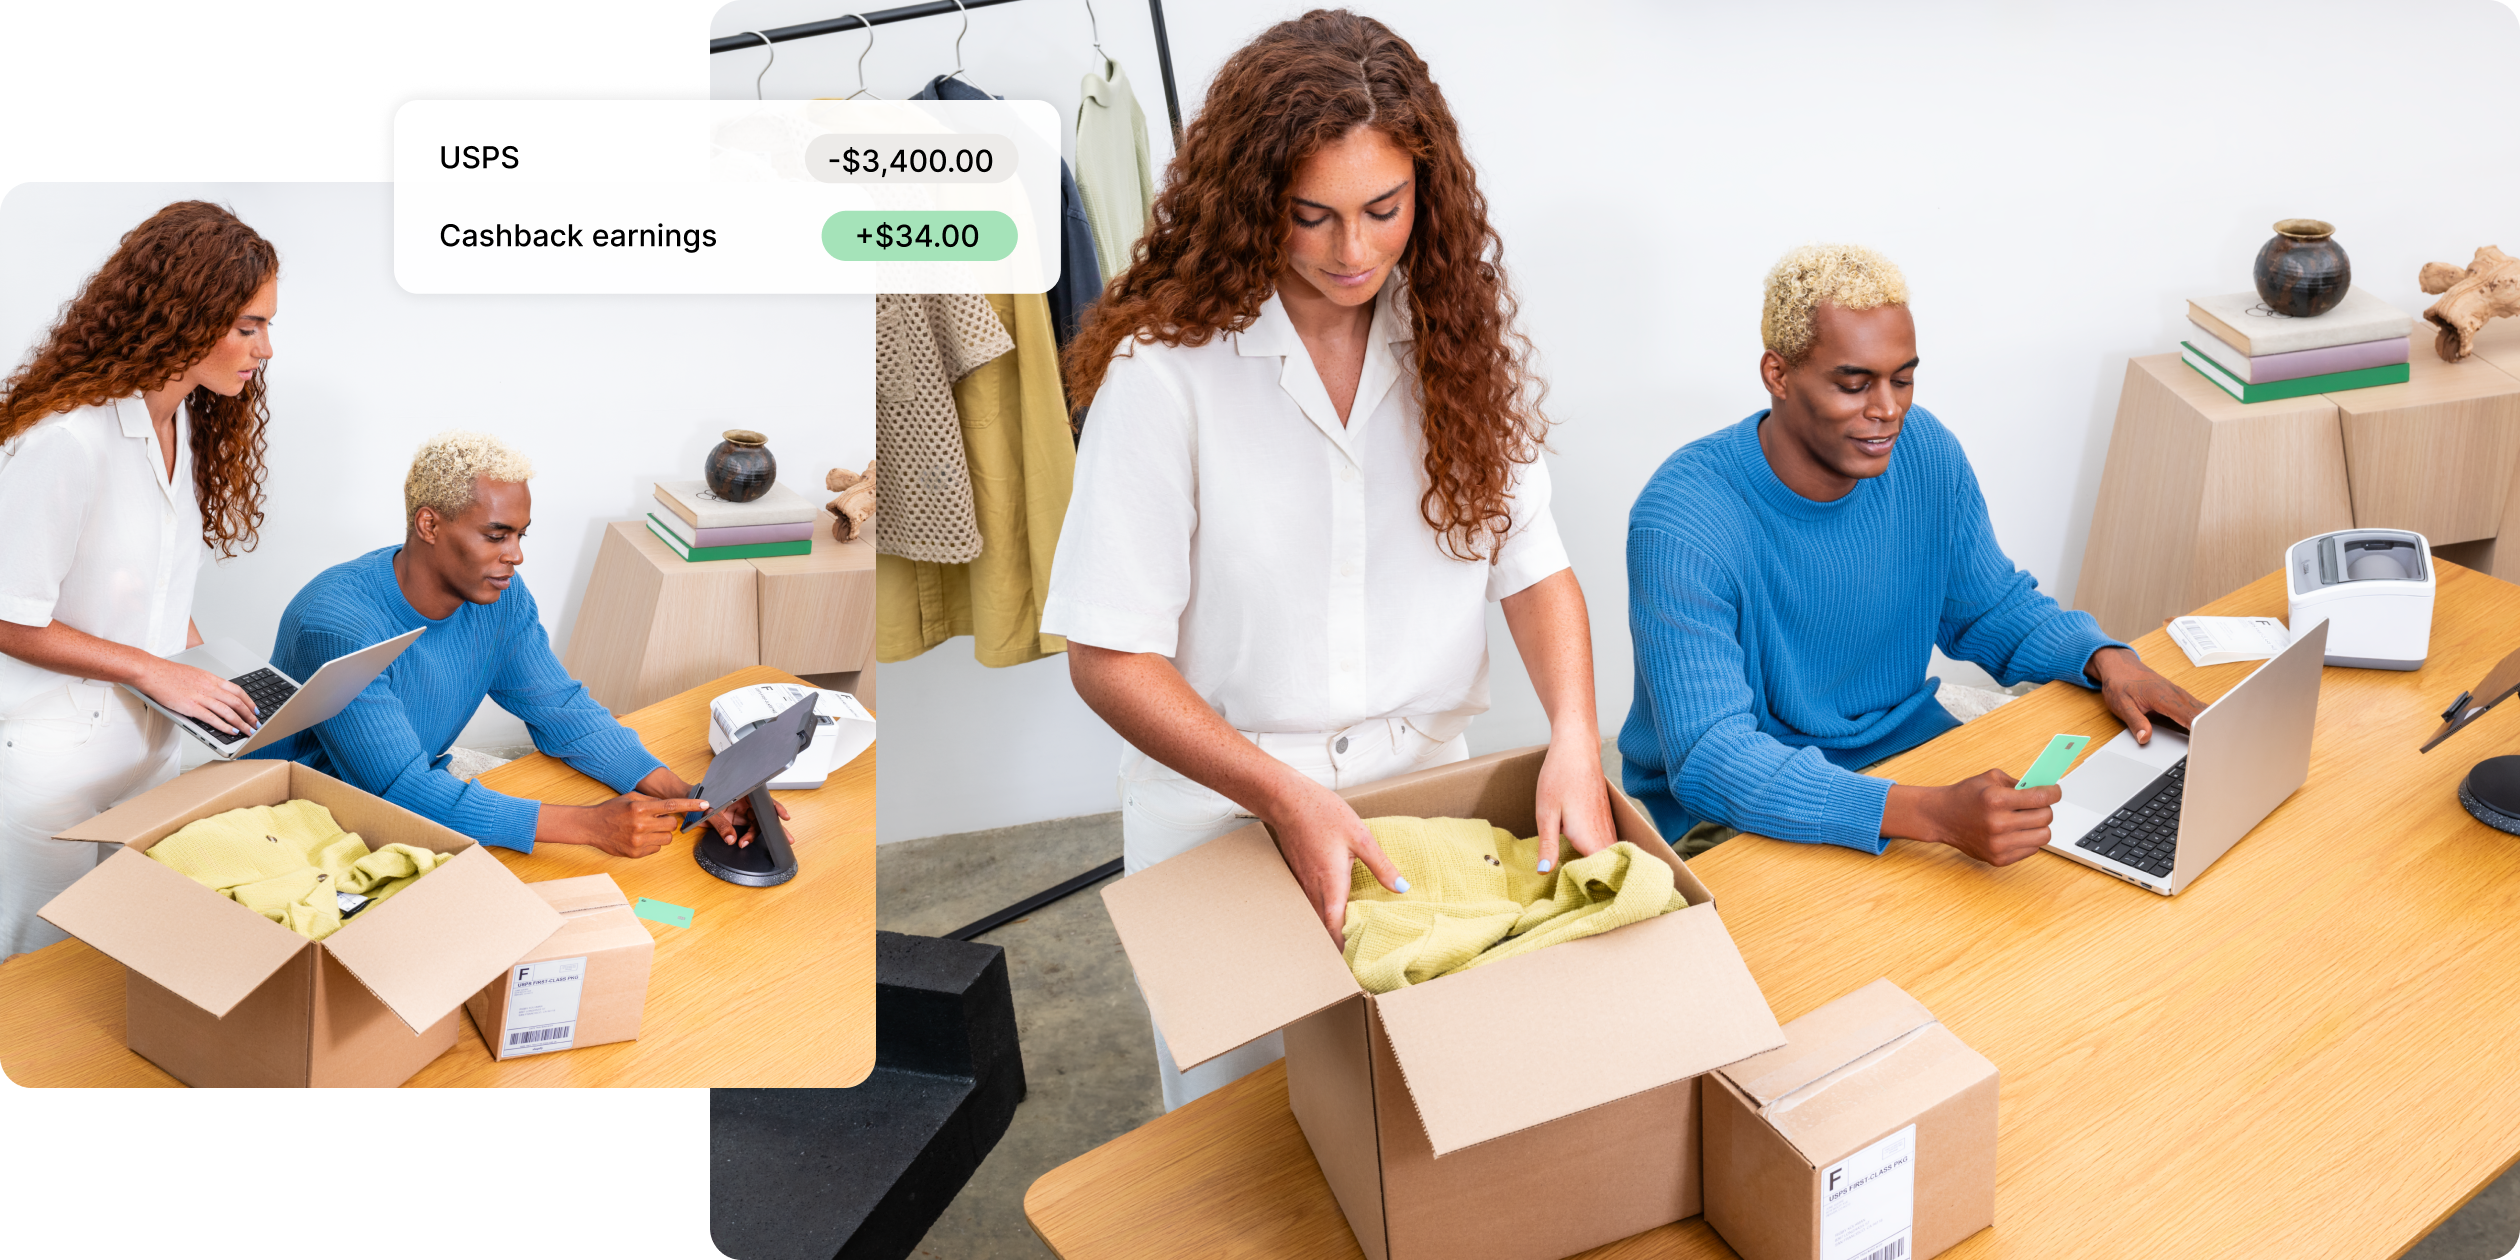 A red-headed Caucasian woman and her Black male partner work on packaging and fulfilling online orders